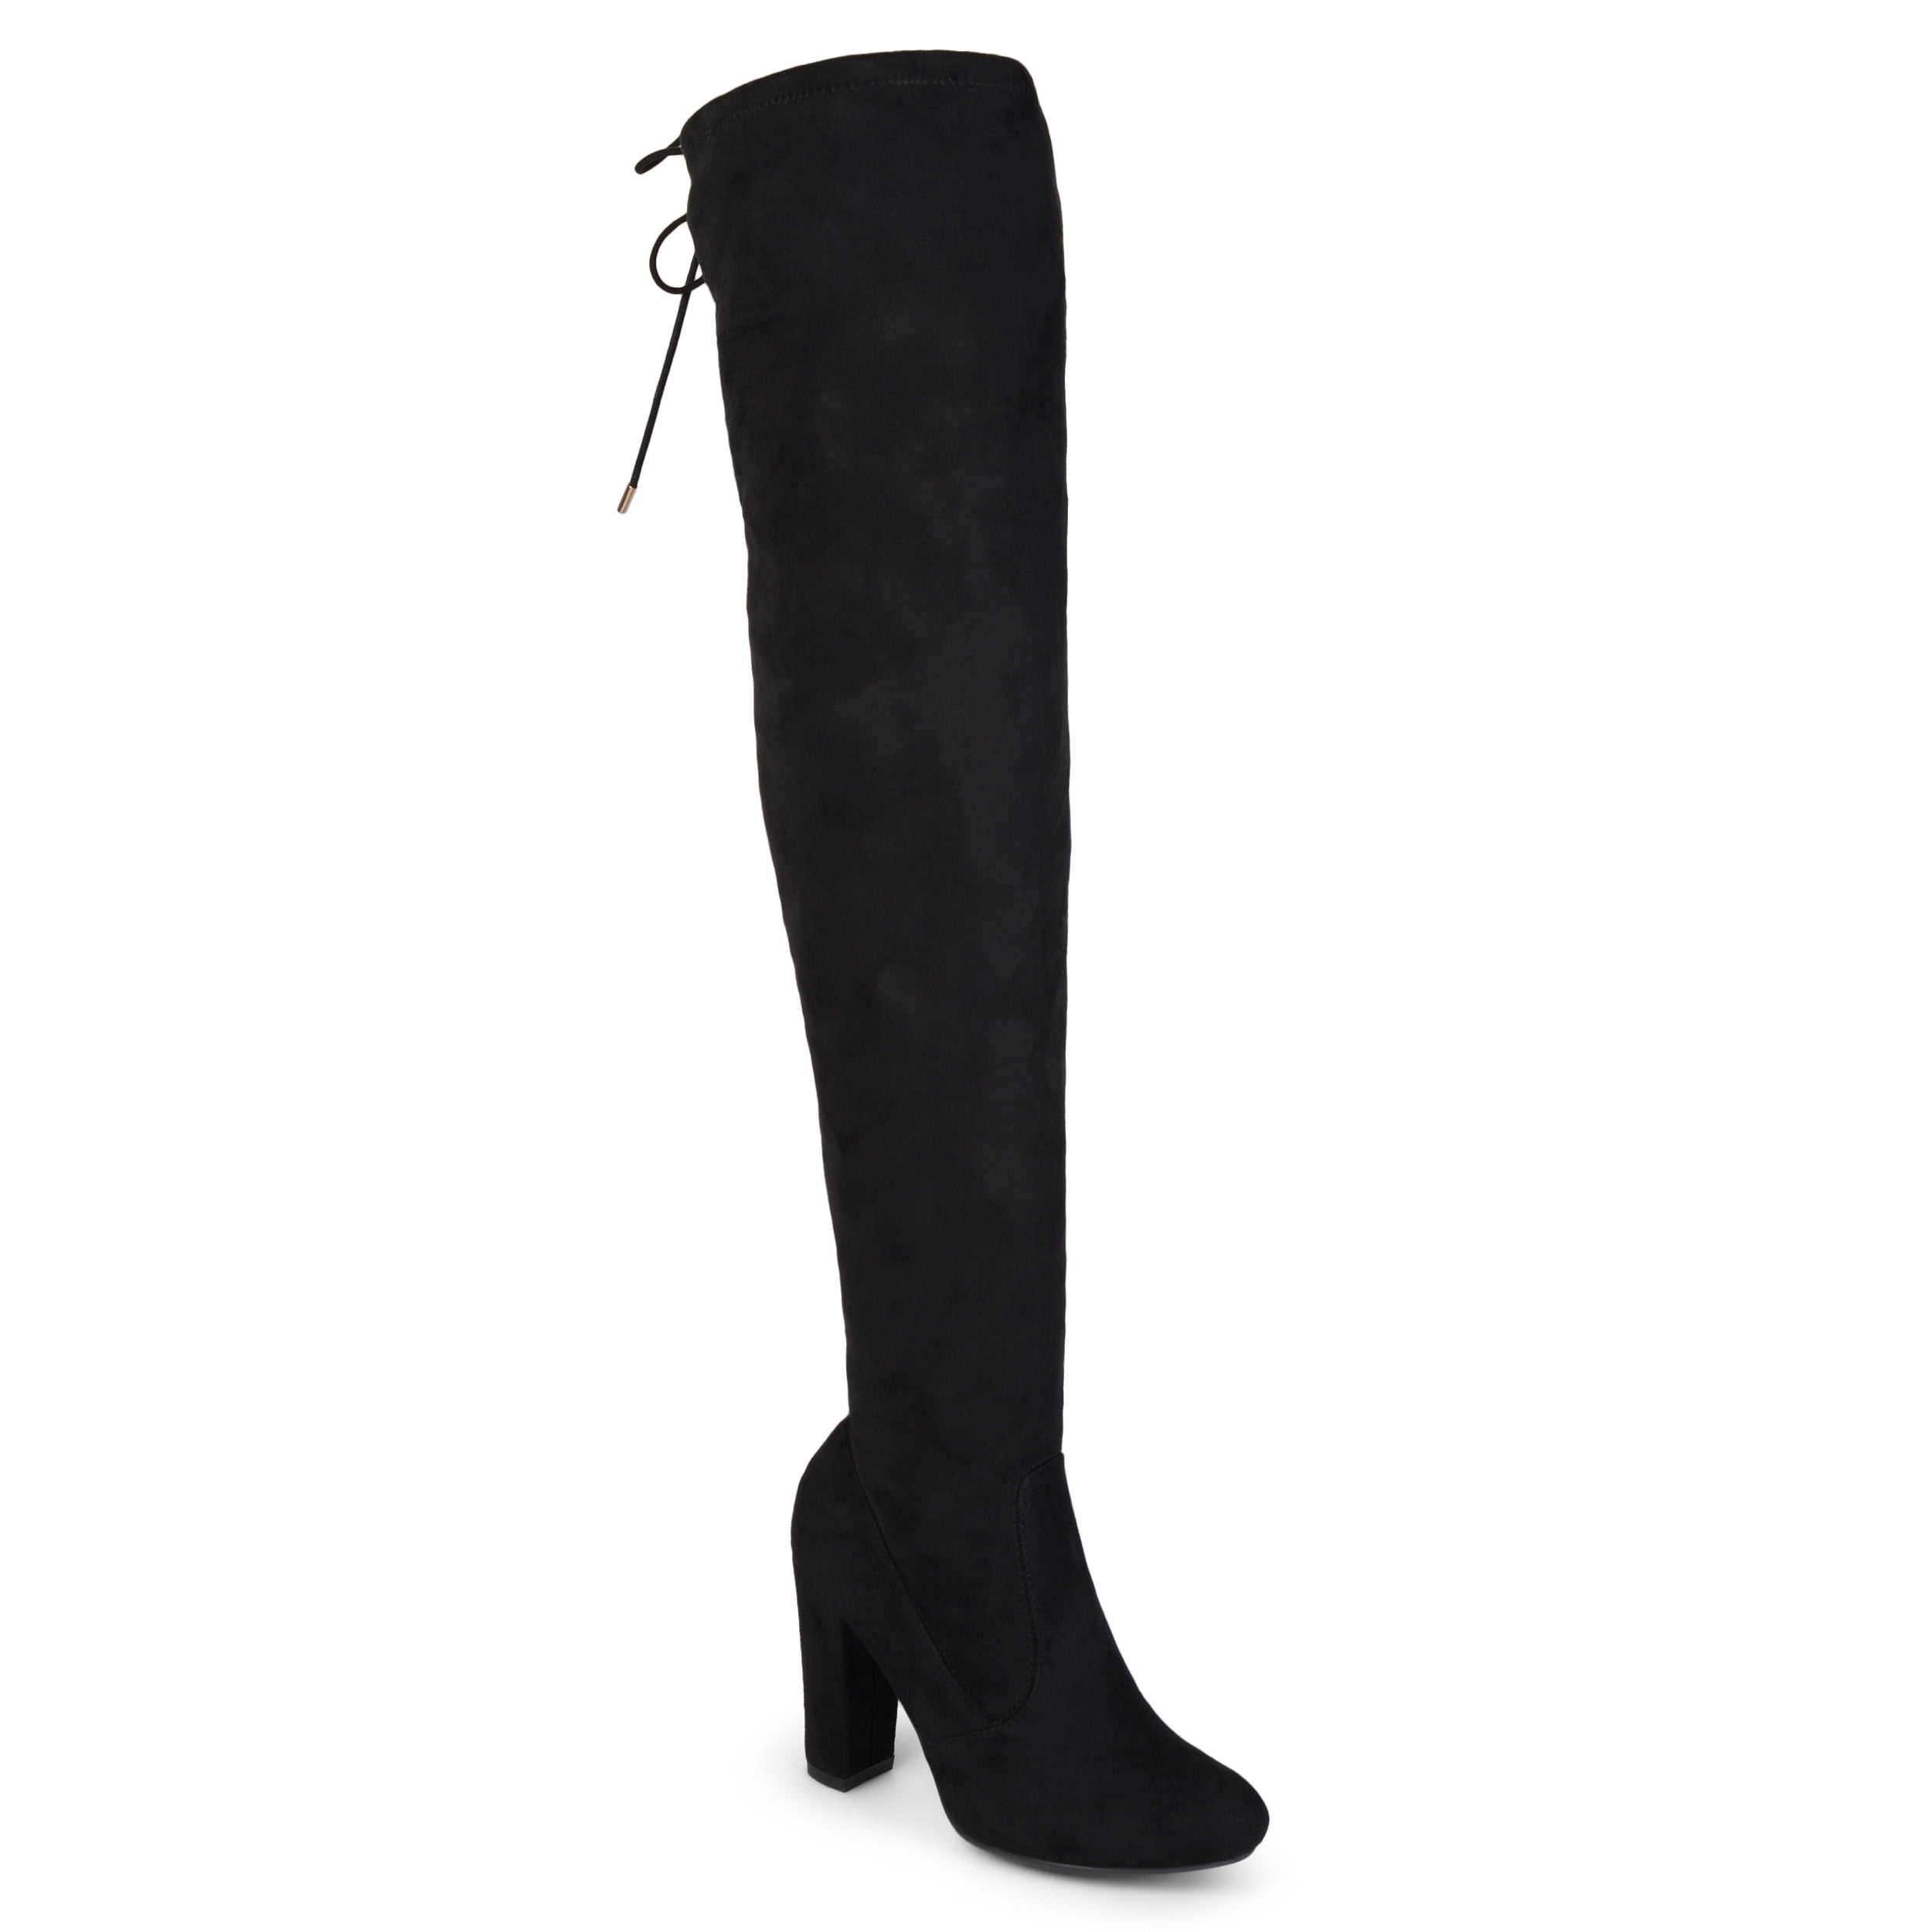 Womens ladies high over the knee elastic stretch pull on flat boots size 